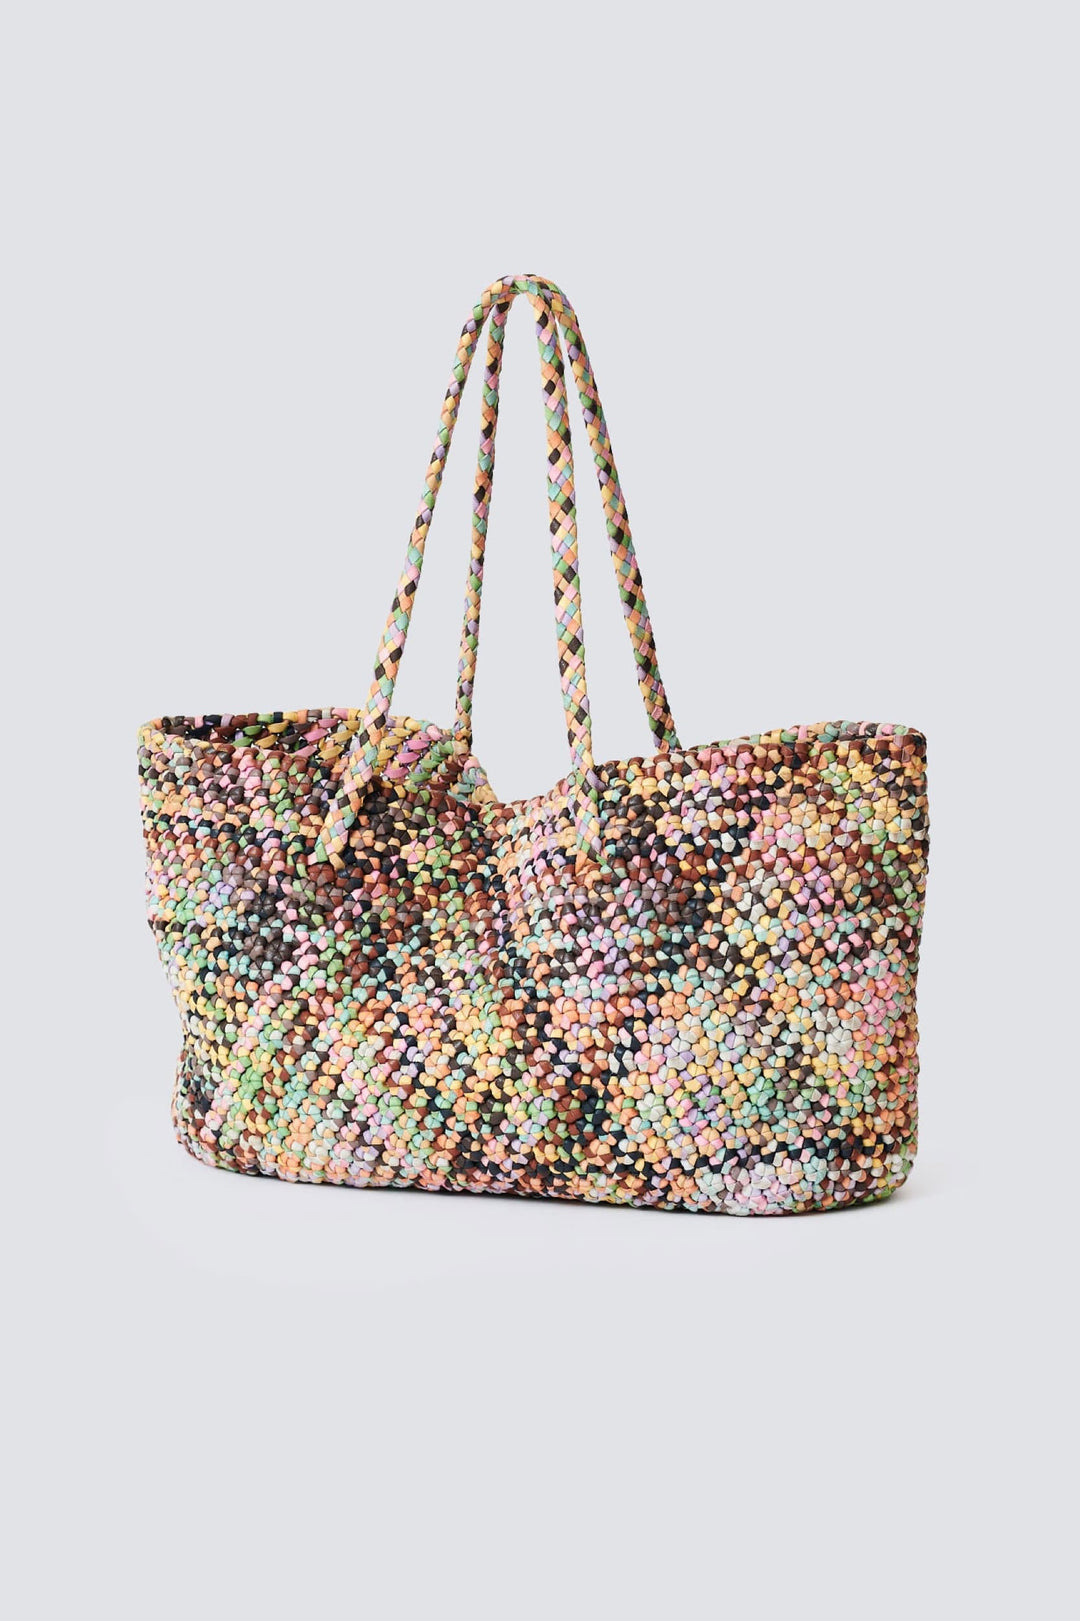 Dragon Diffusion woven leather bag handmade - Octo Multi Pastels